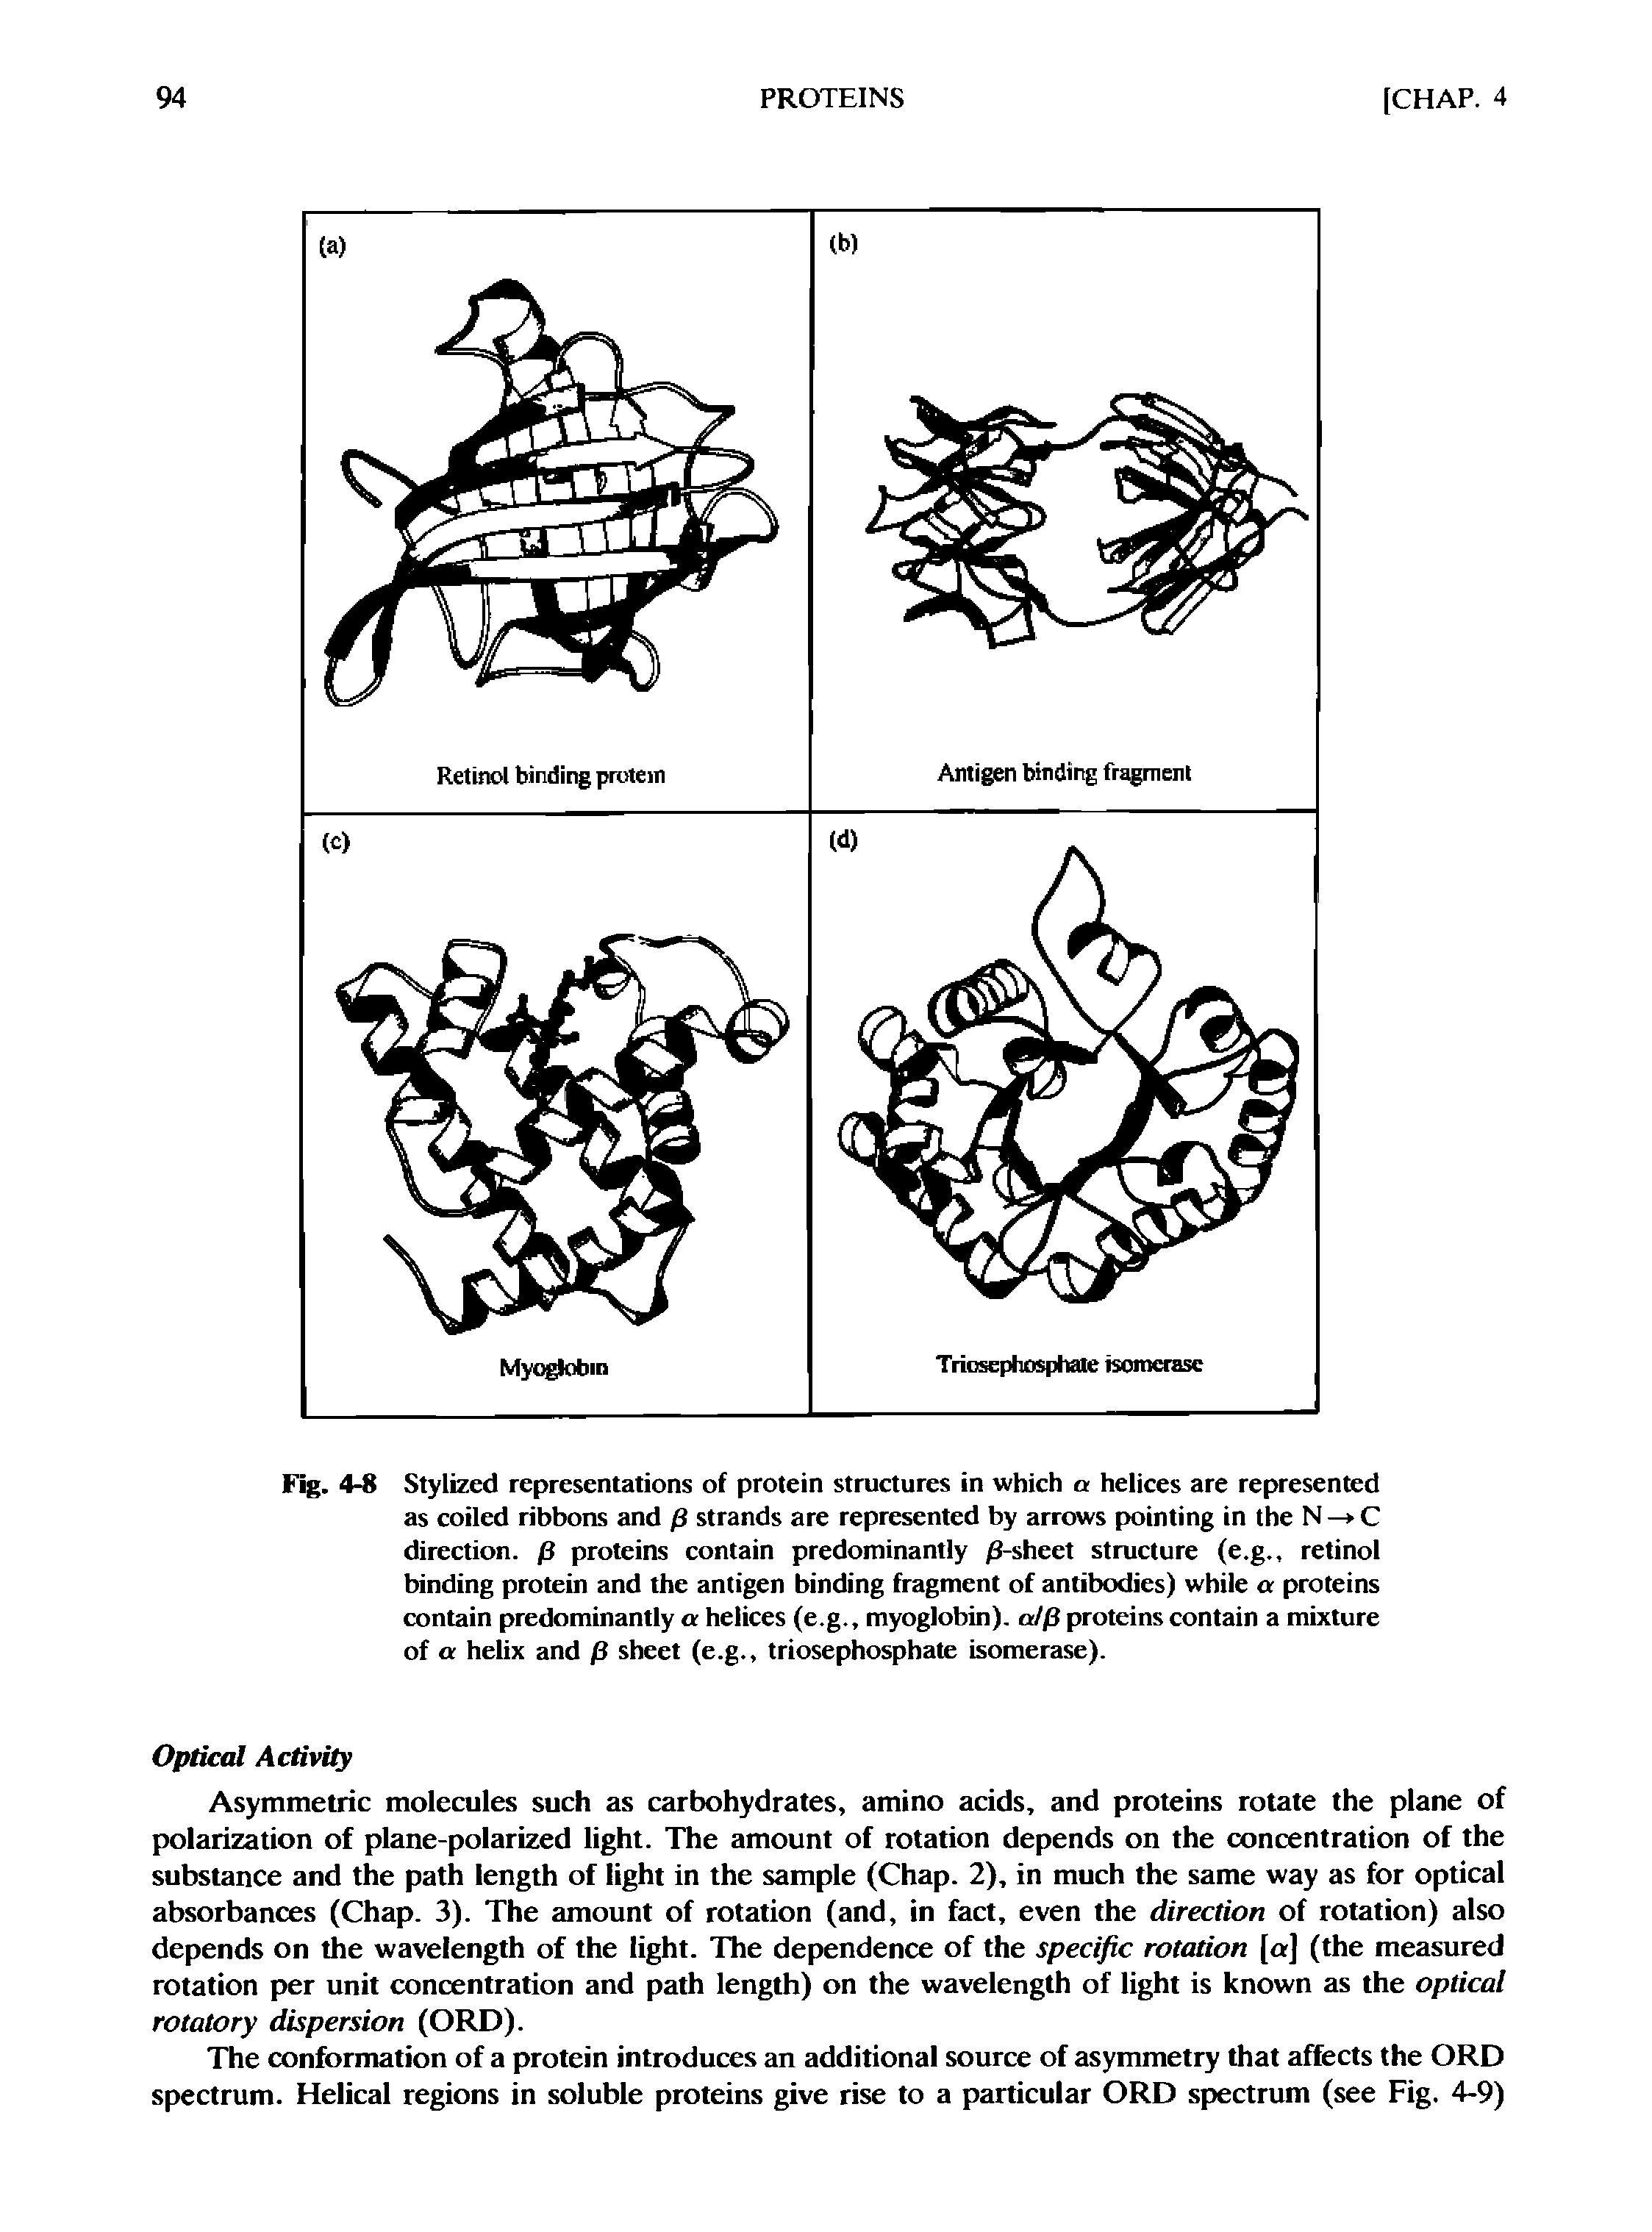 Fig. 4-8 Stylized representations of protein structures in which a helices are represented as coiled ribbons and p strands are represented by arrows pointing in the N — C direction, p proteins contain predominantly /3-sheet structure (e.g., retinol binding protein and the antigen binding fragment of antibodies) while a proteins contain predominantly a helices (e.g., myoglobin), alp proteins contain a mixture of a helix and p sheet (e.g., triosephosphate isomerase).